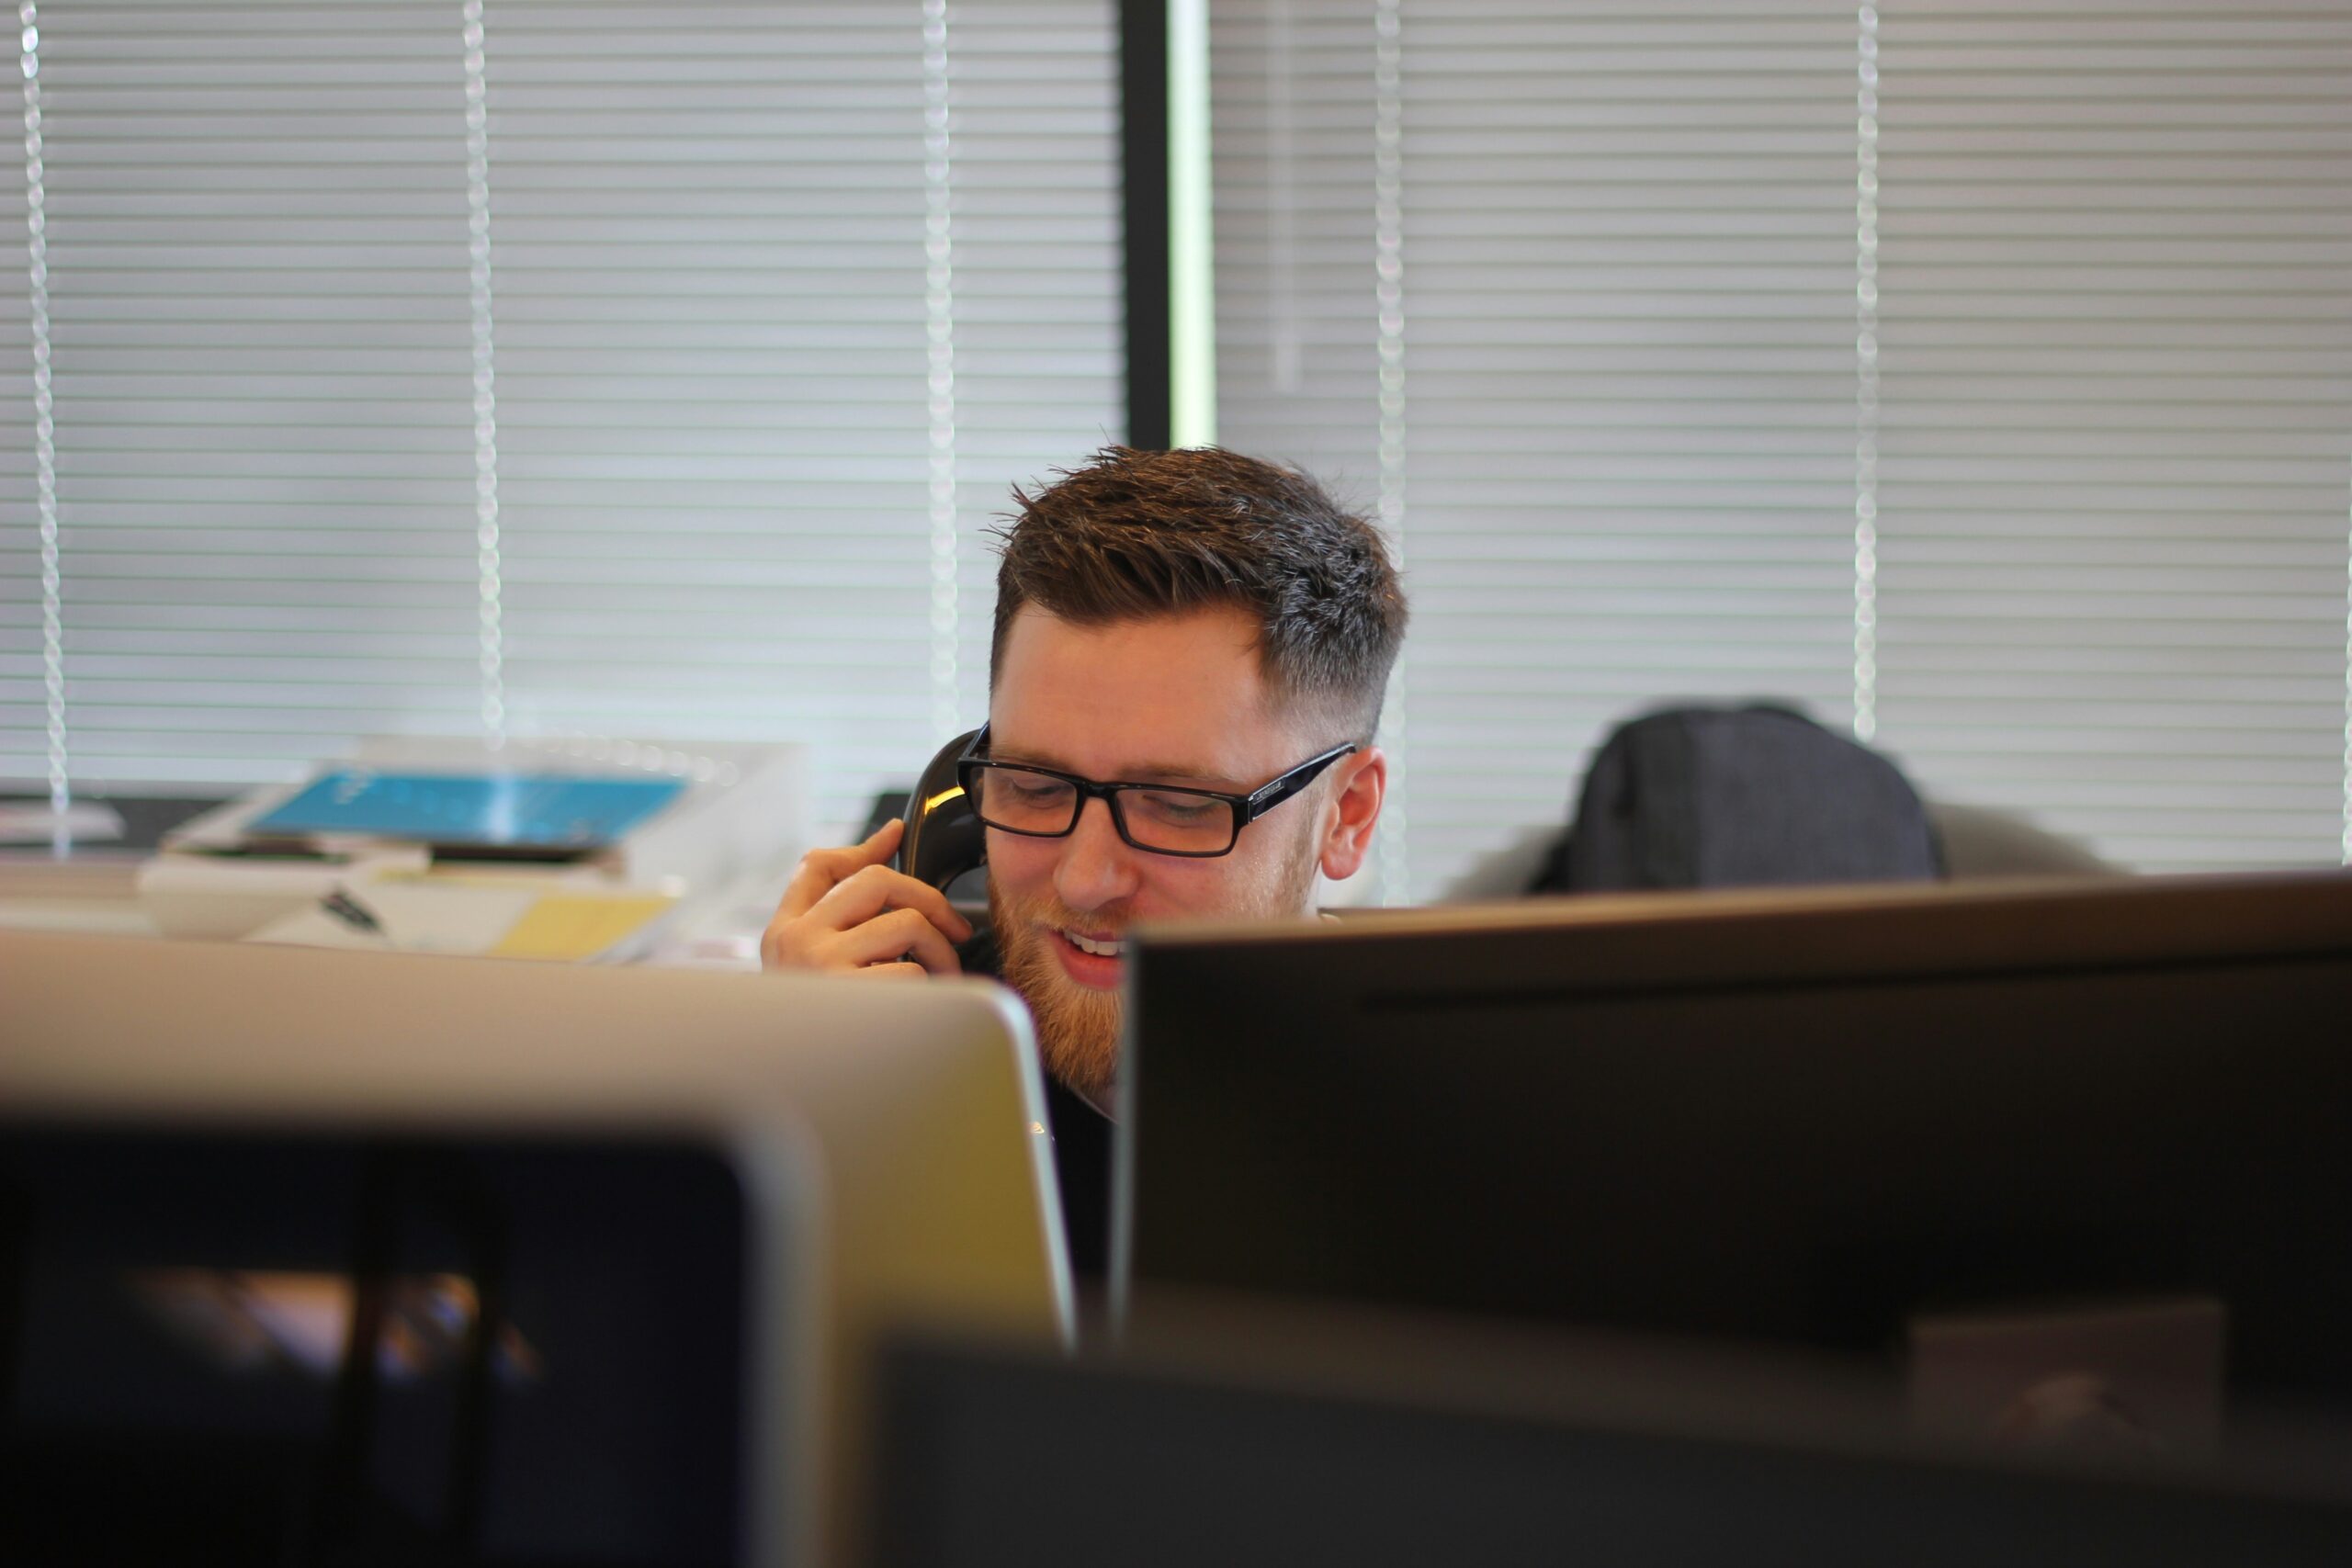 A man with glasses talking on the phone to a service provider while working at a desk with multiple computer screens in an office.